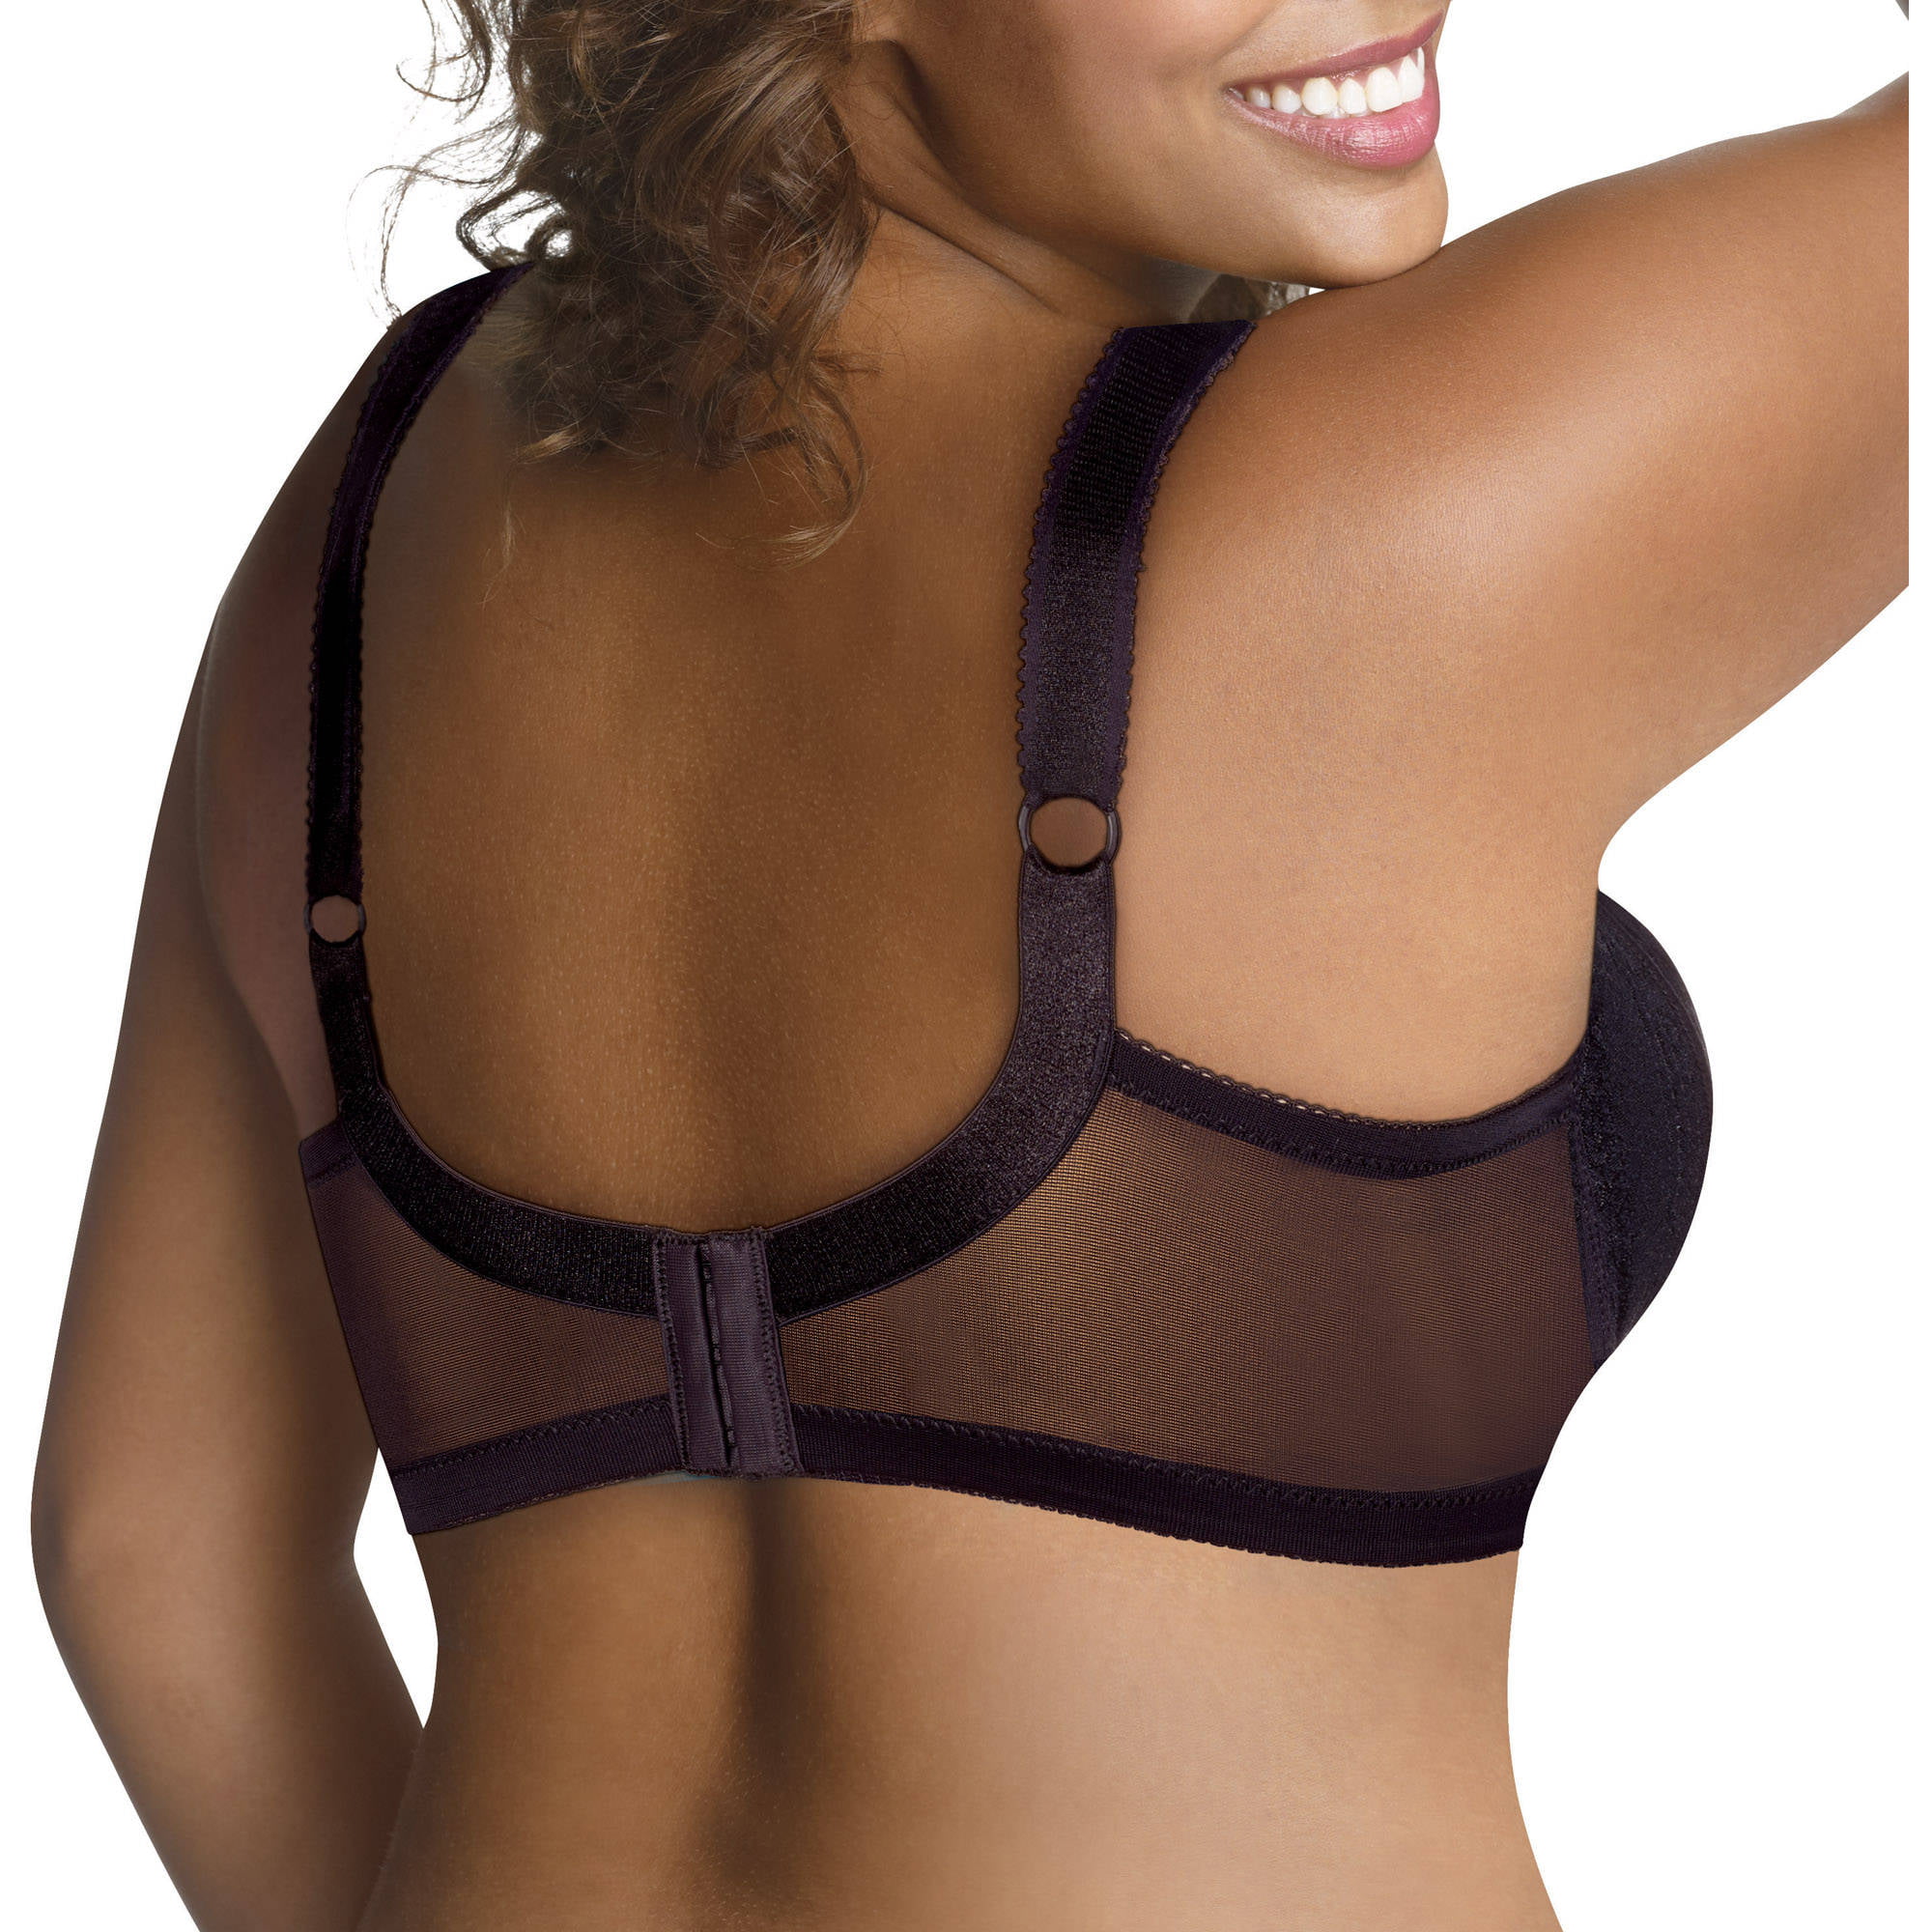 Just My Size Women's Comfort Shaping Bra, Style 1Q20 